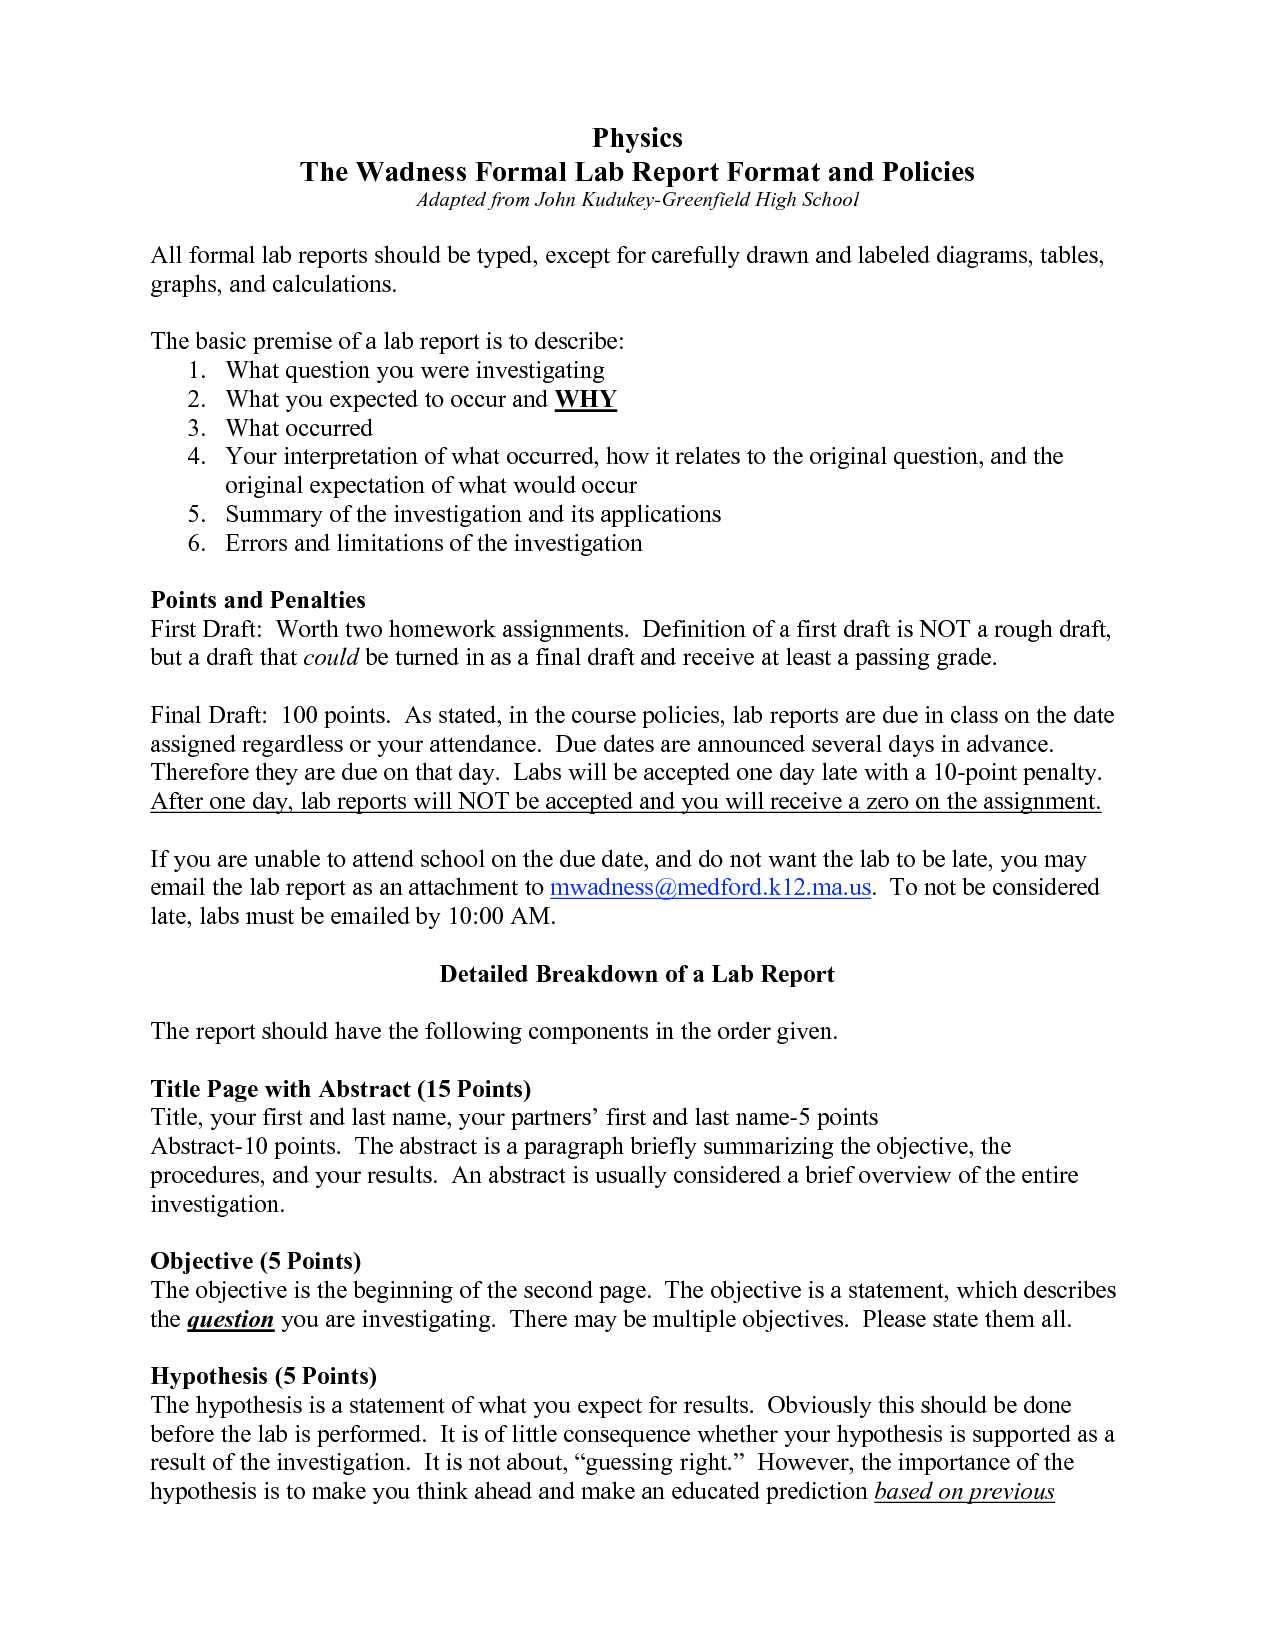 Formal Lab Report Template Physics : Biological Science Throughout Formal Lab Report Template